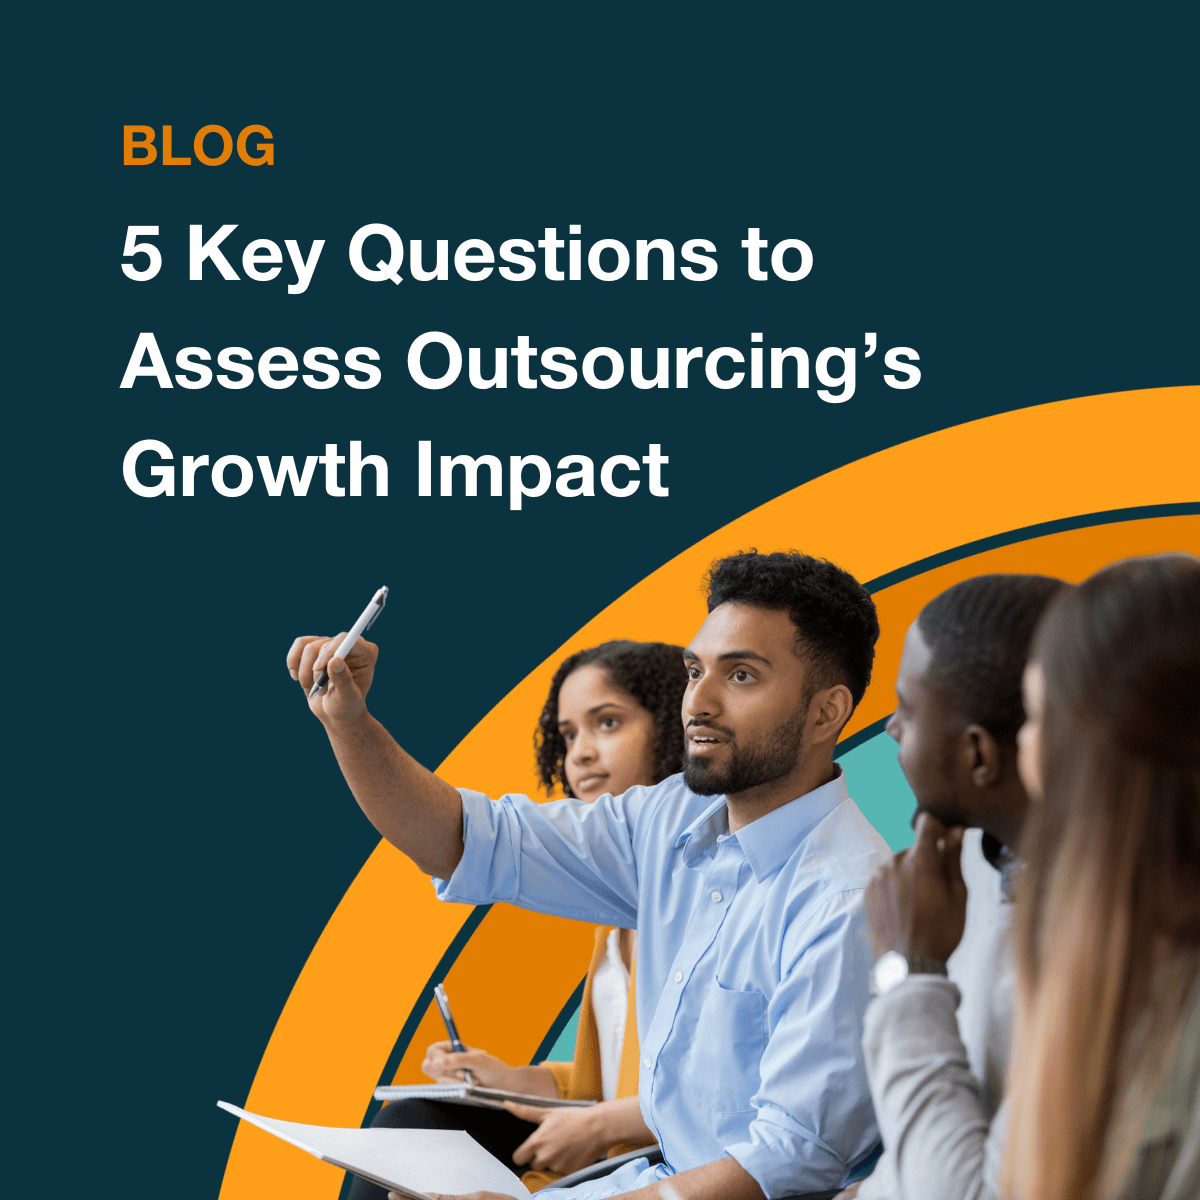 5 Key Questions to Assess Outsourcing’s Growth Impact